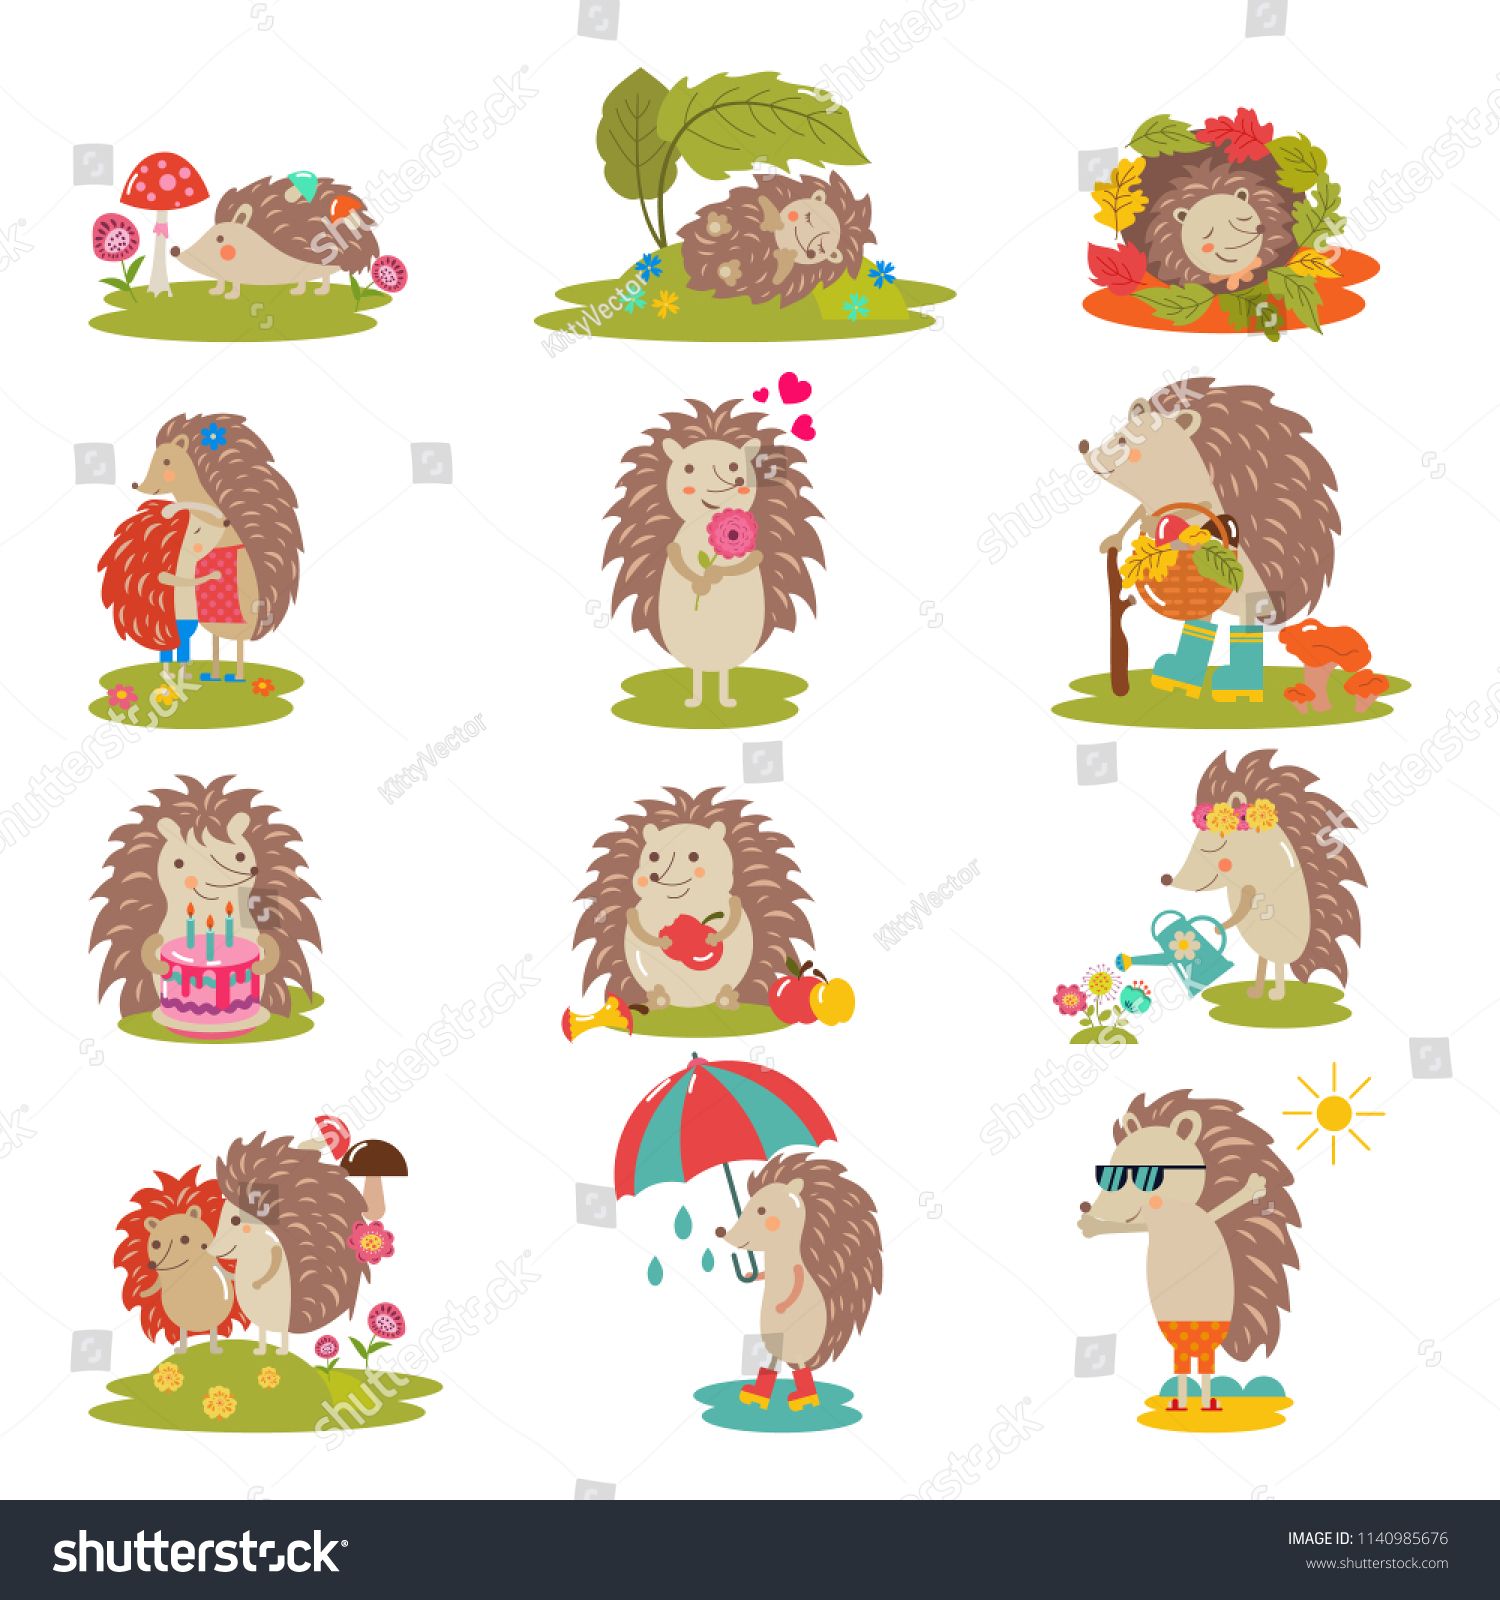 Hedgehog vector cartoon prickly animal character child with